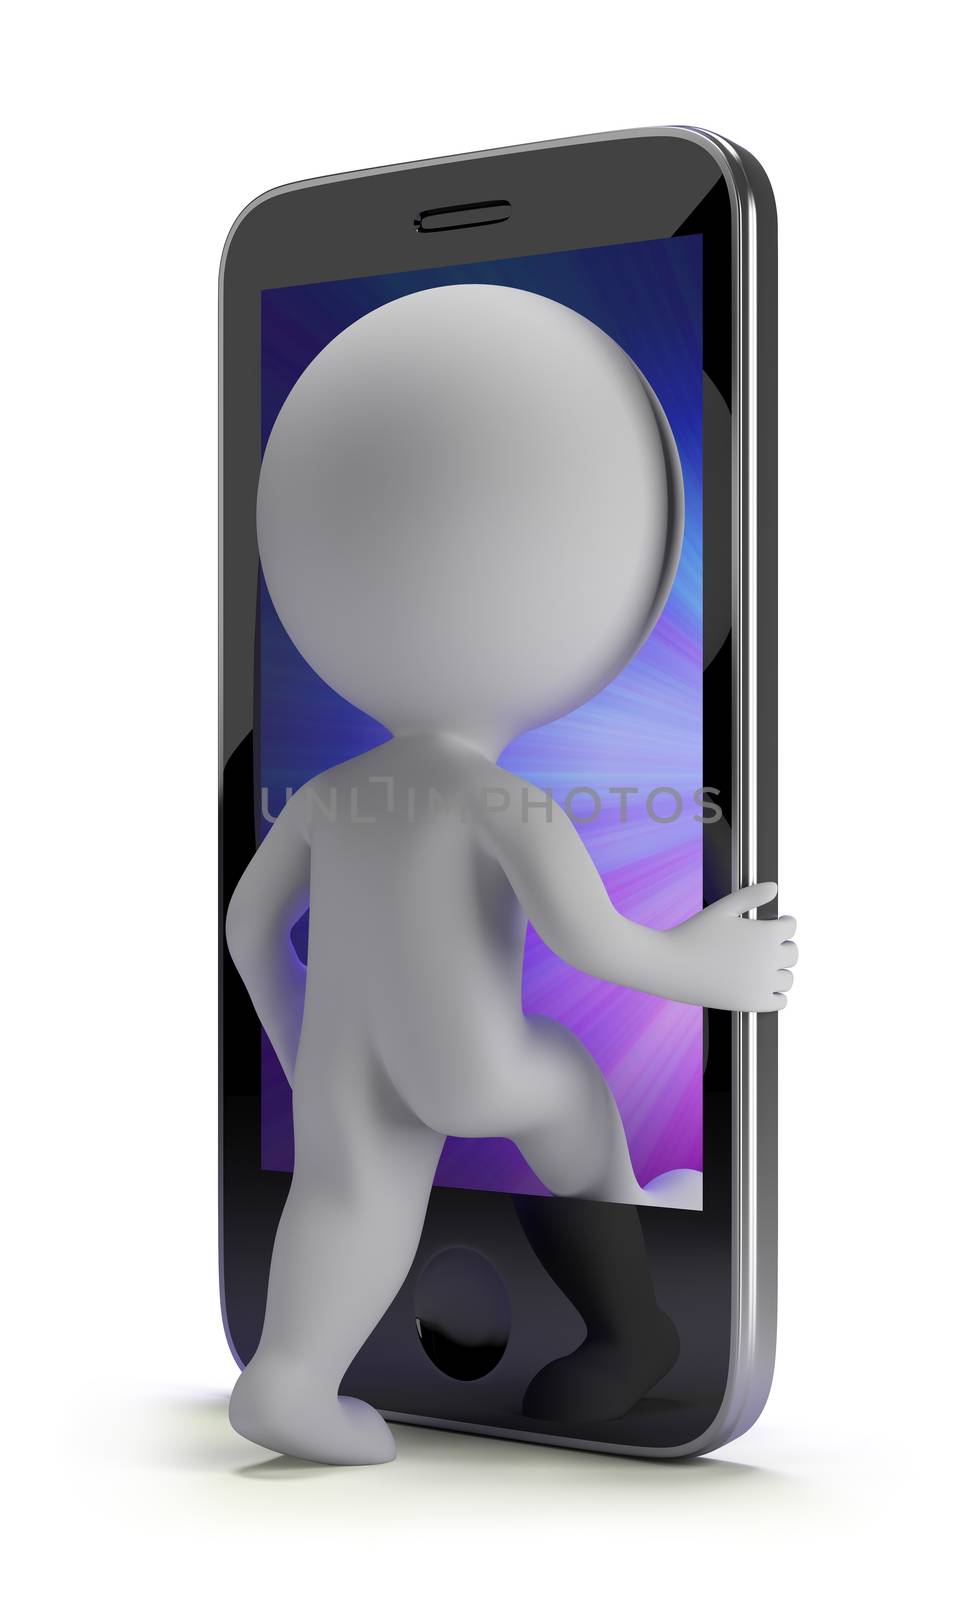 3d small people - login to your phone by Anatoly